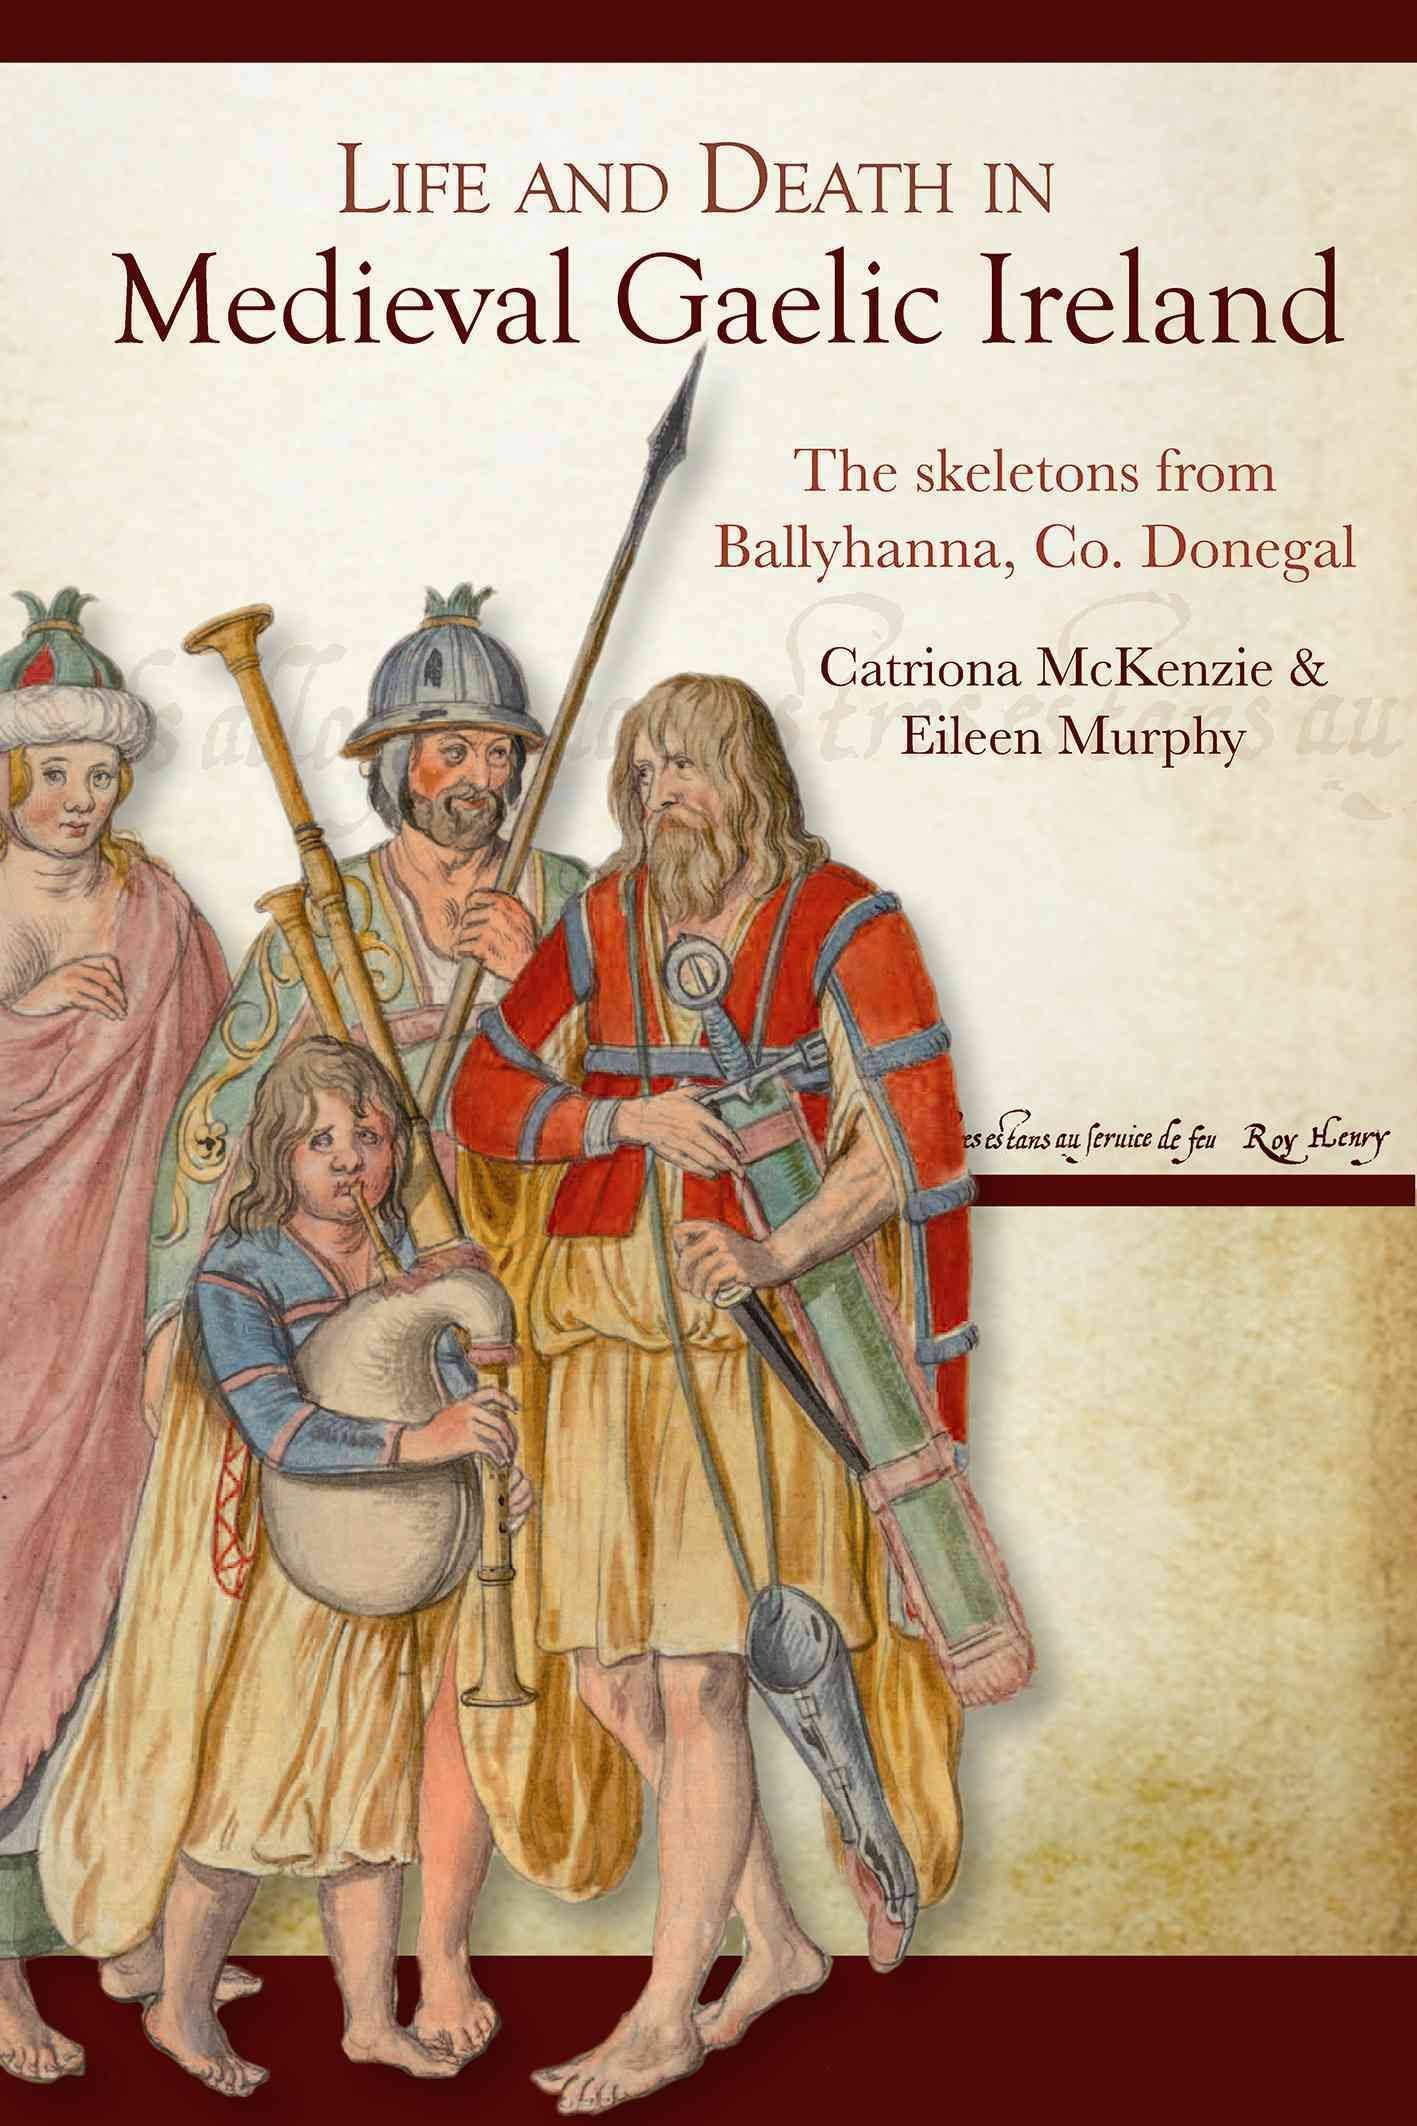 Life and Death in Medieval Gaelic Ireland: The skeletons from Ballyhanna, Co. Donegal